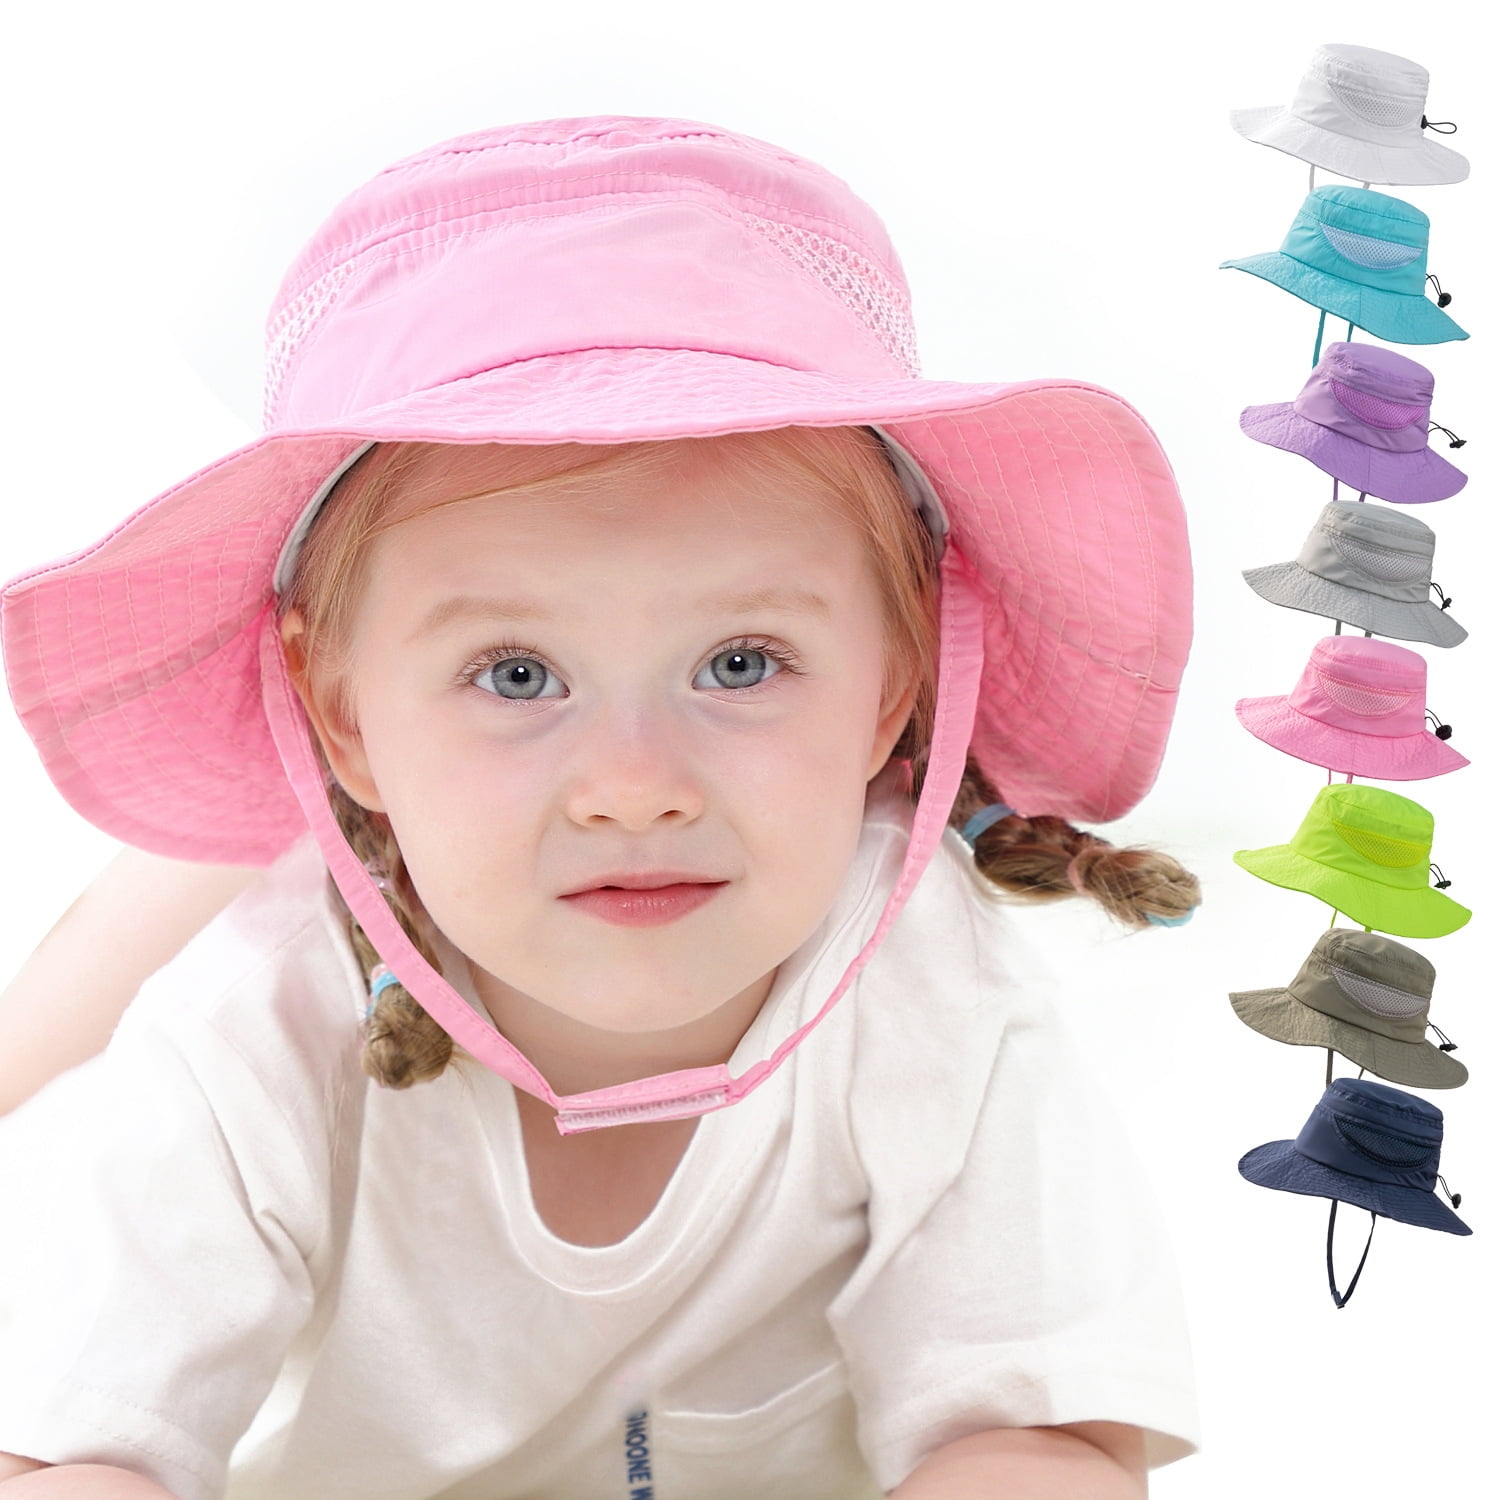 Husfou Kids Sun Hat, Summer Toddler Hats Breathable for Girls Boys Baby ...